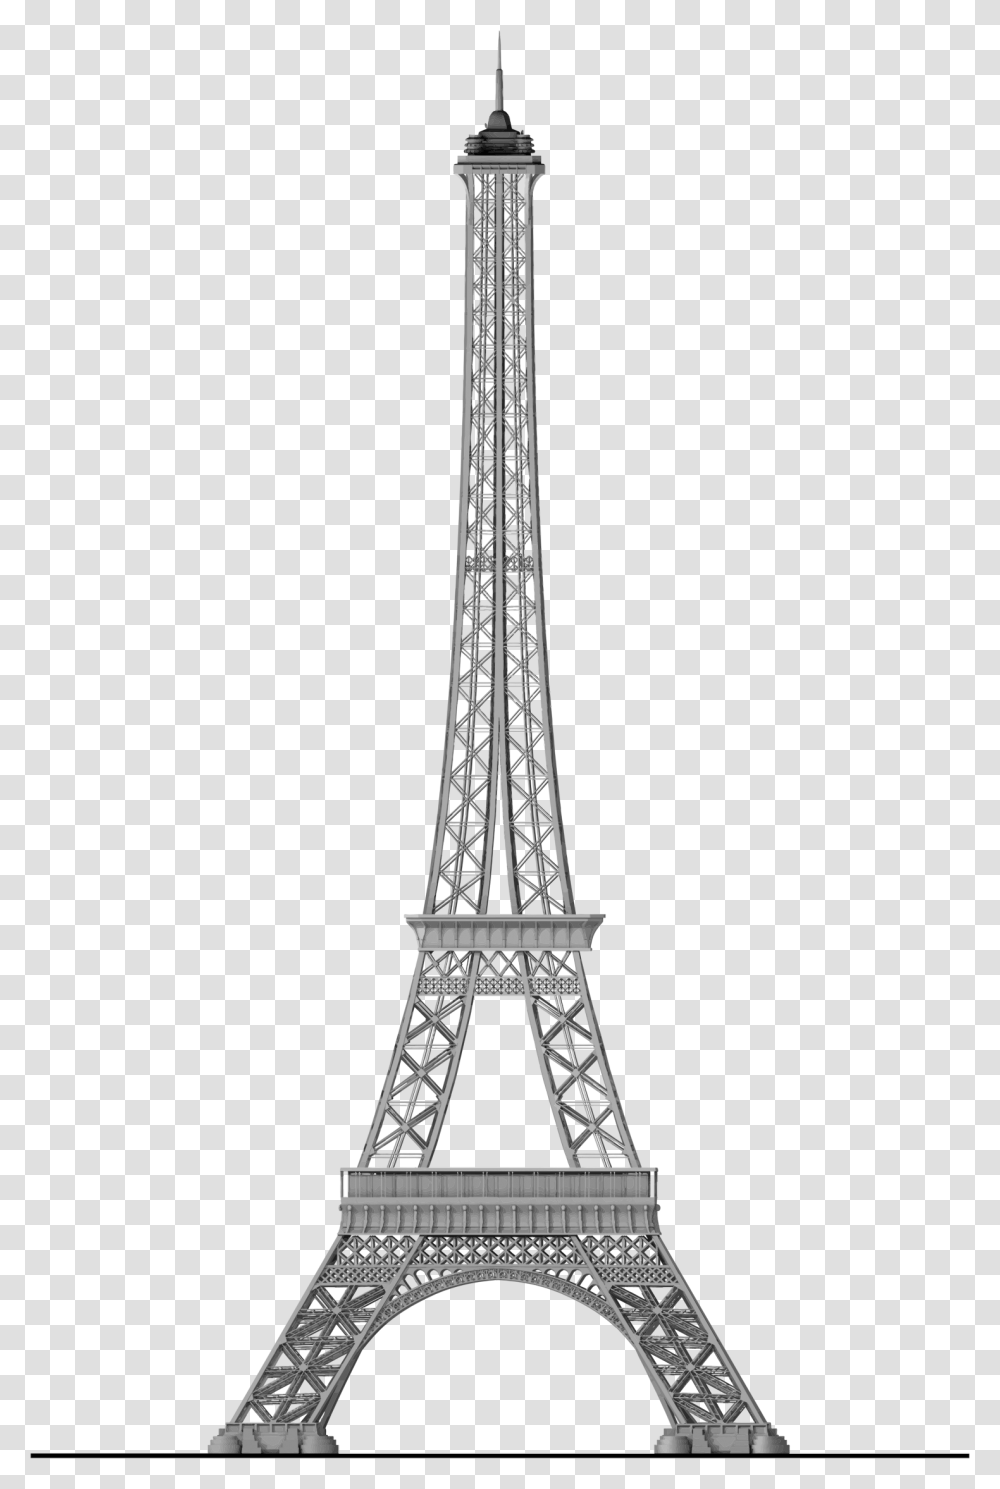 Clipart 7 Wonder Of The World In Drawing, Tower, Architecture, Building, Spire Transparent Png